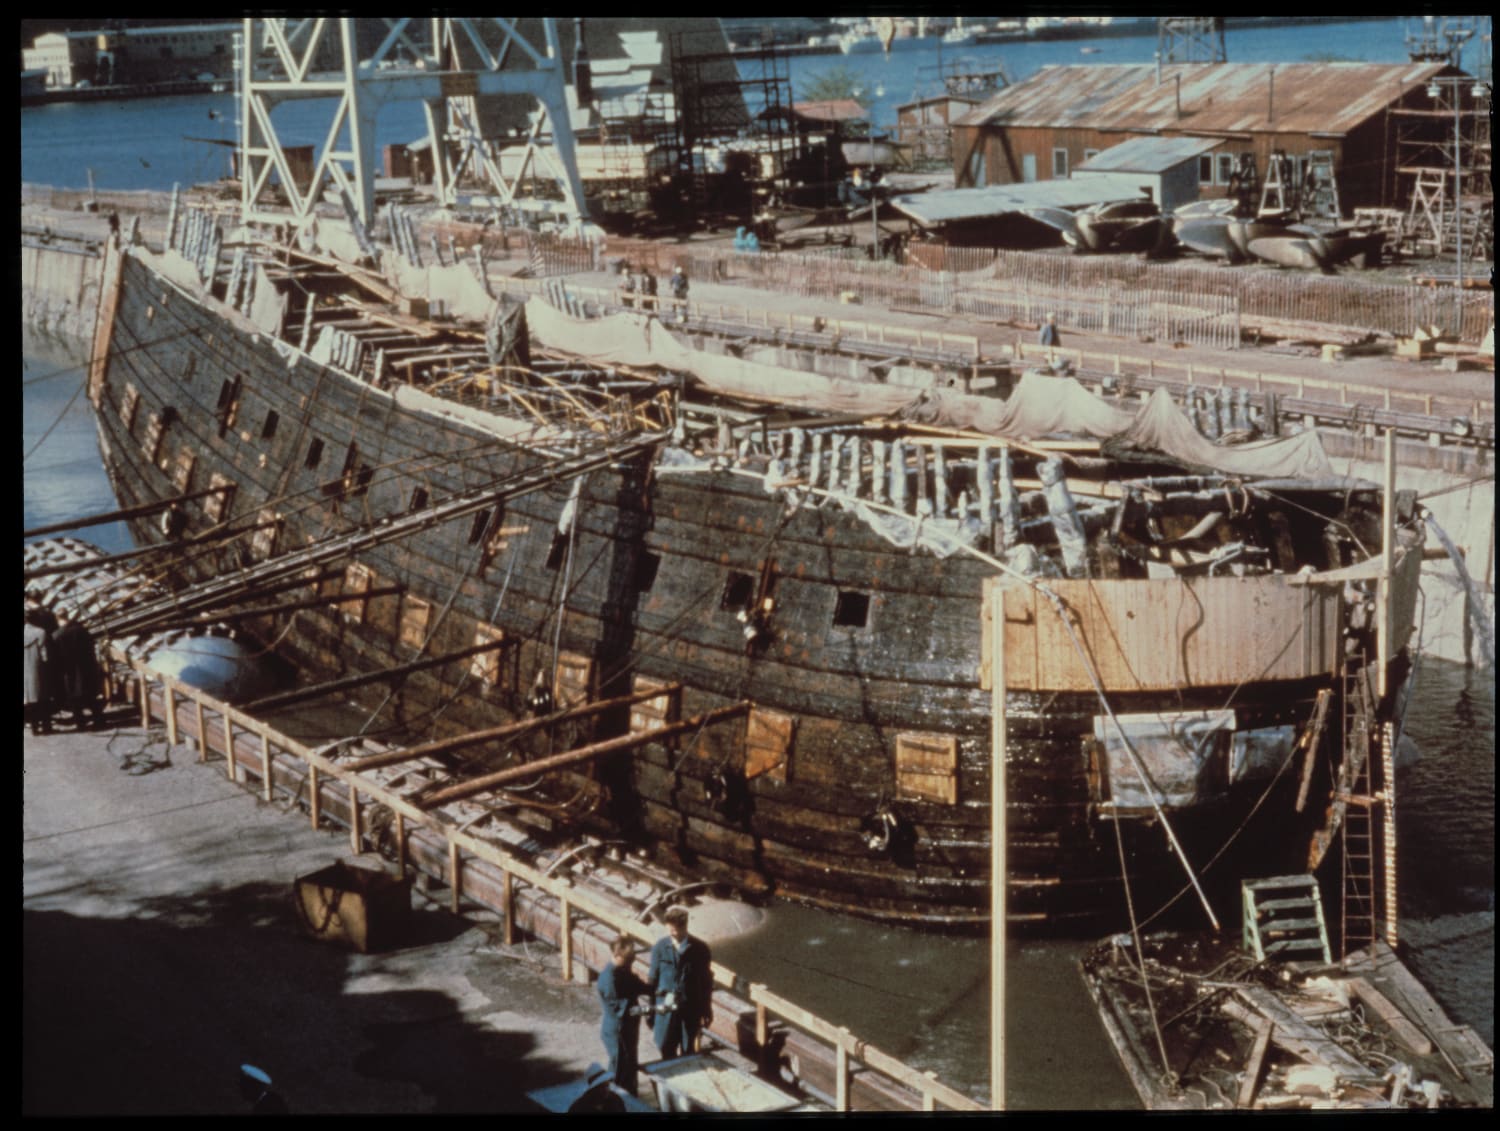 Warship Vasa recovered from the sea floor after 333 years. Stockholm, Sweden on the 24th of April 1961.